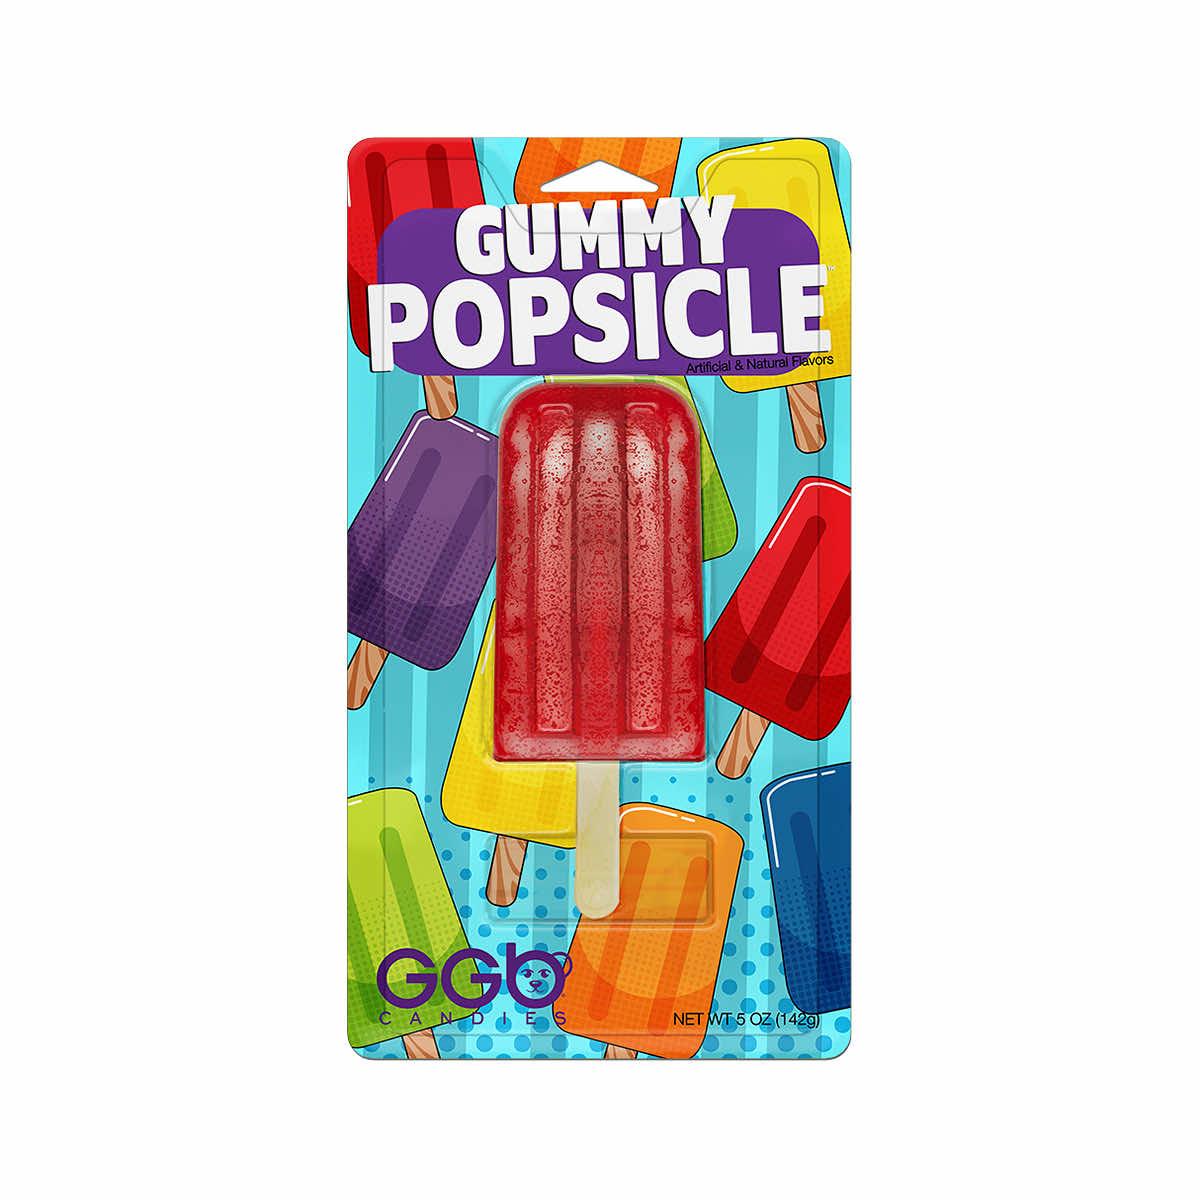  Giant Gummy Popsicle Candy - Cherry